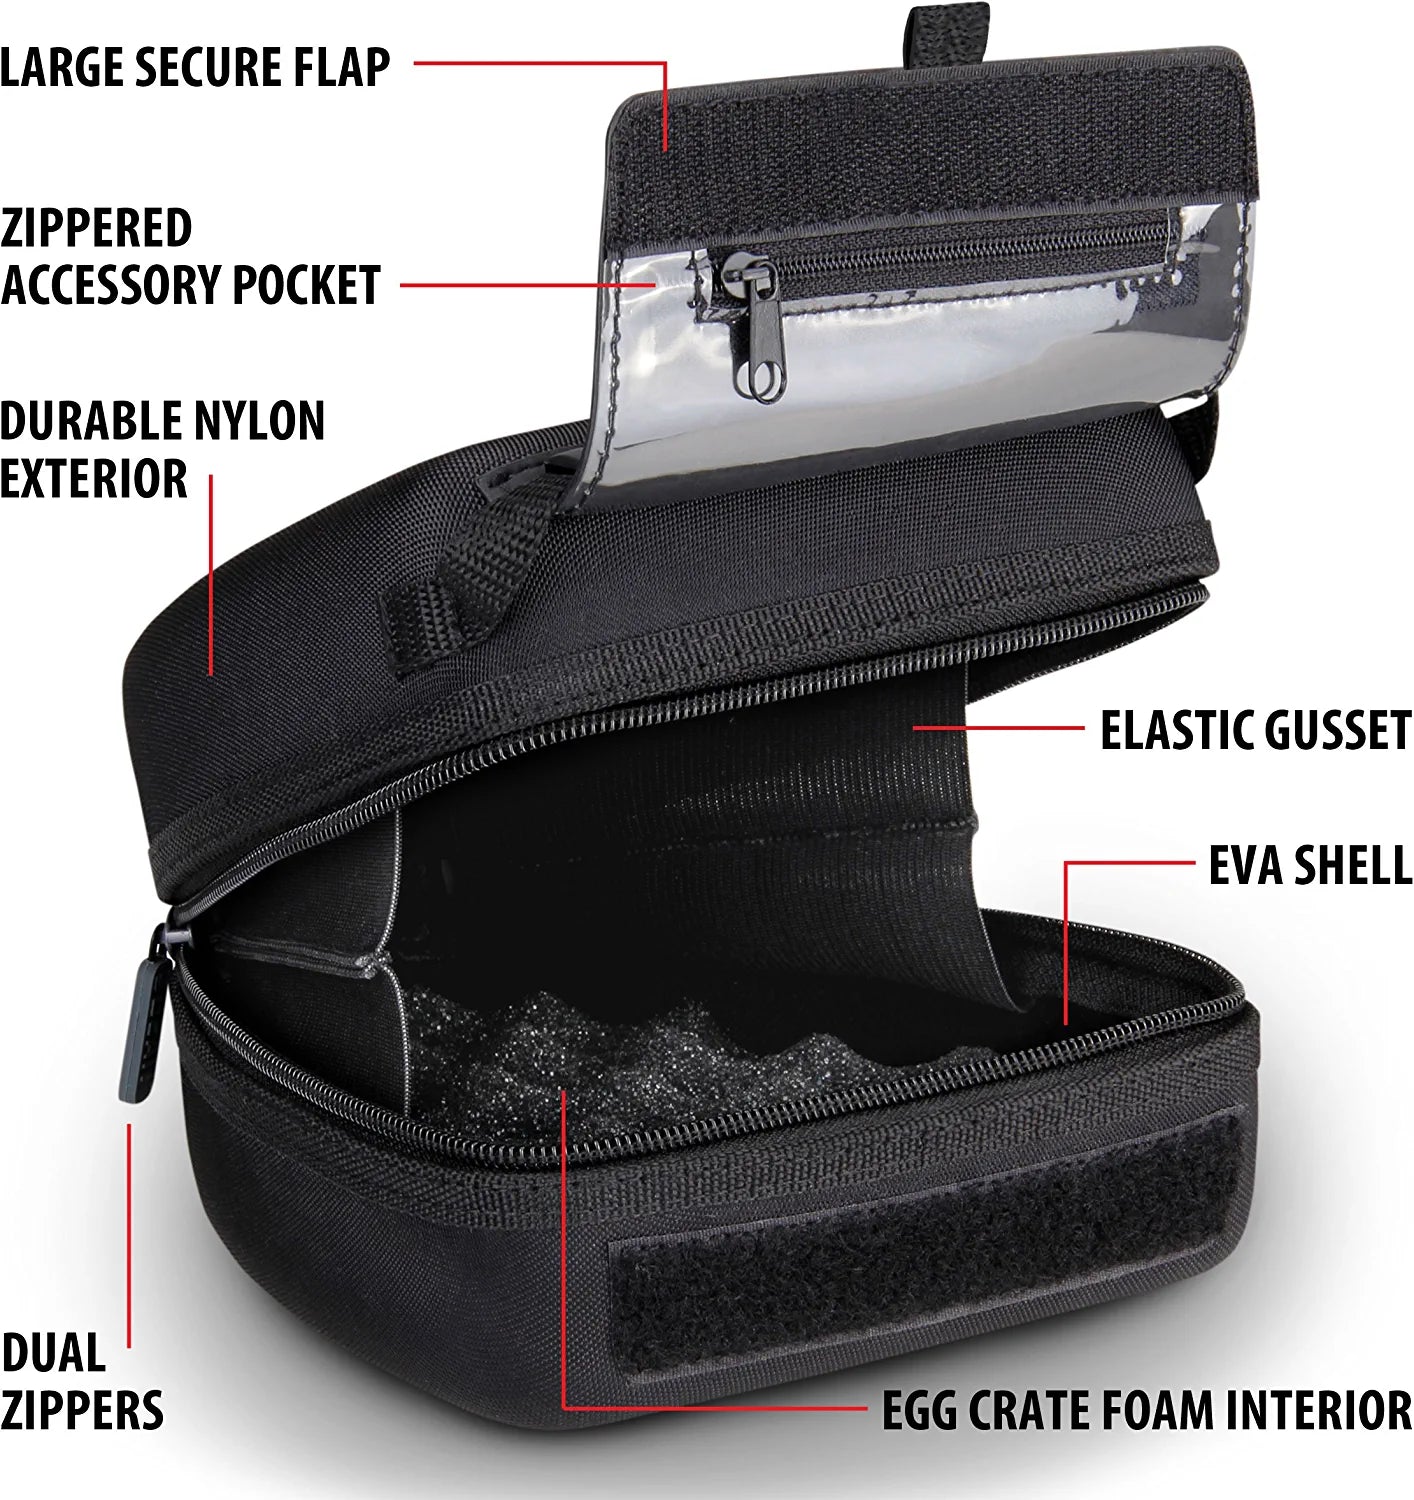 Hard Shell DSLR Camera Case (Black) with Molded EVA Protection, Quick Access Opening, Padded Interior and Rubber Coated Handle-Compatible with Nikon, Canon, Pentax, Olympus and More